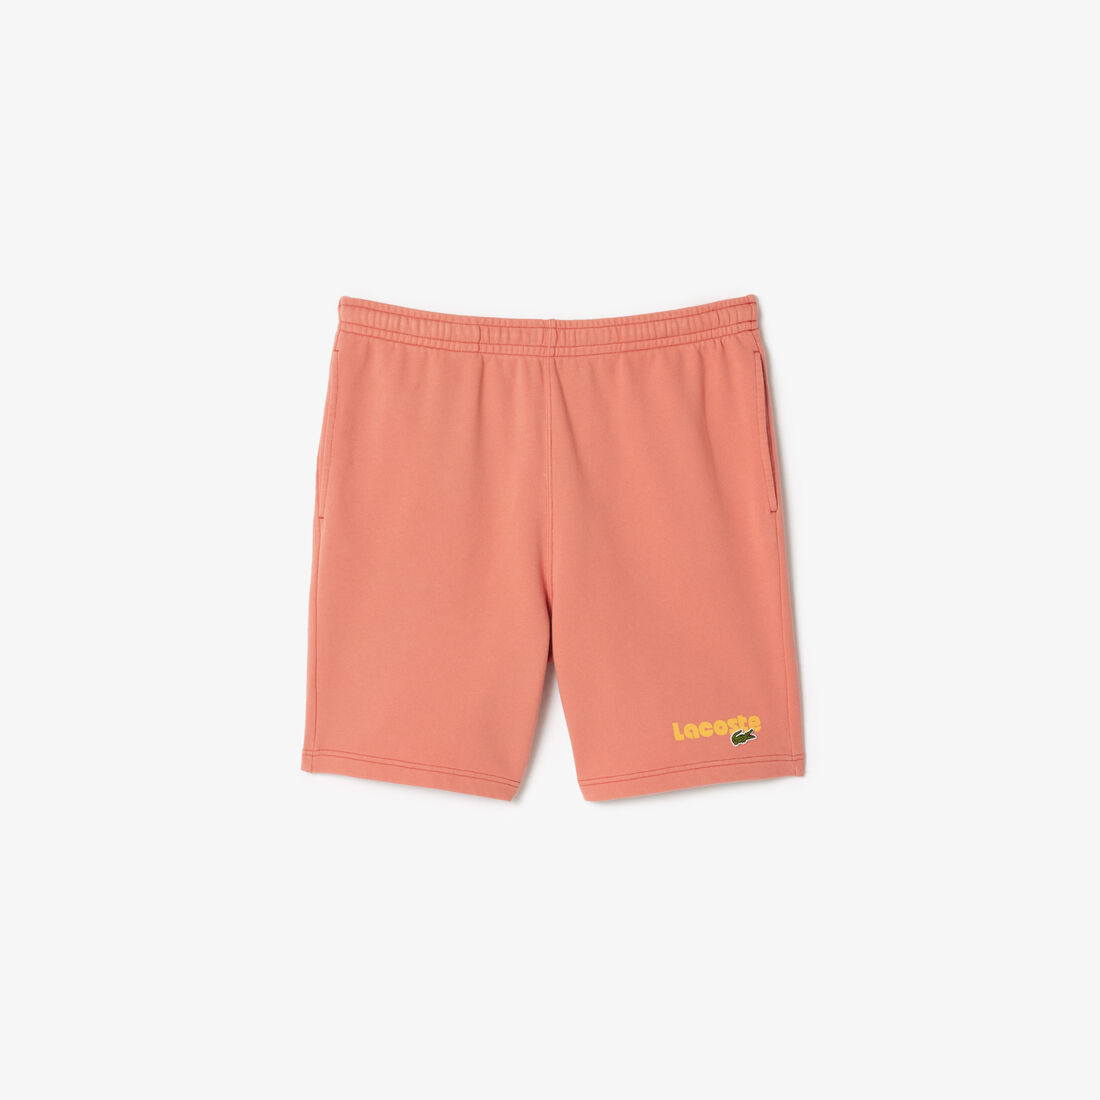 Washed Effect Lacoste Print Jogger Shorts - GH7526-00-ZV9